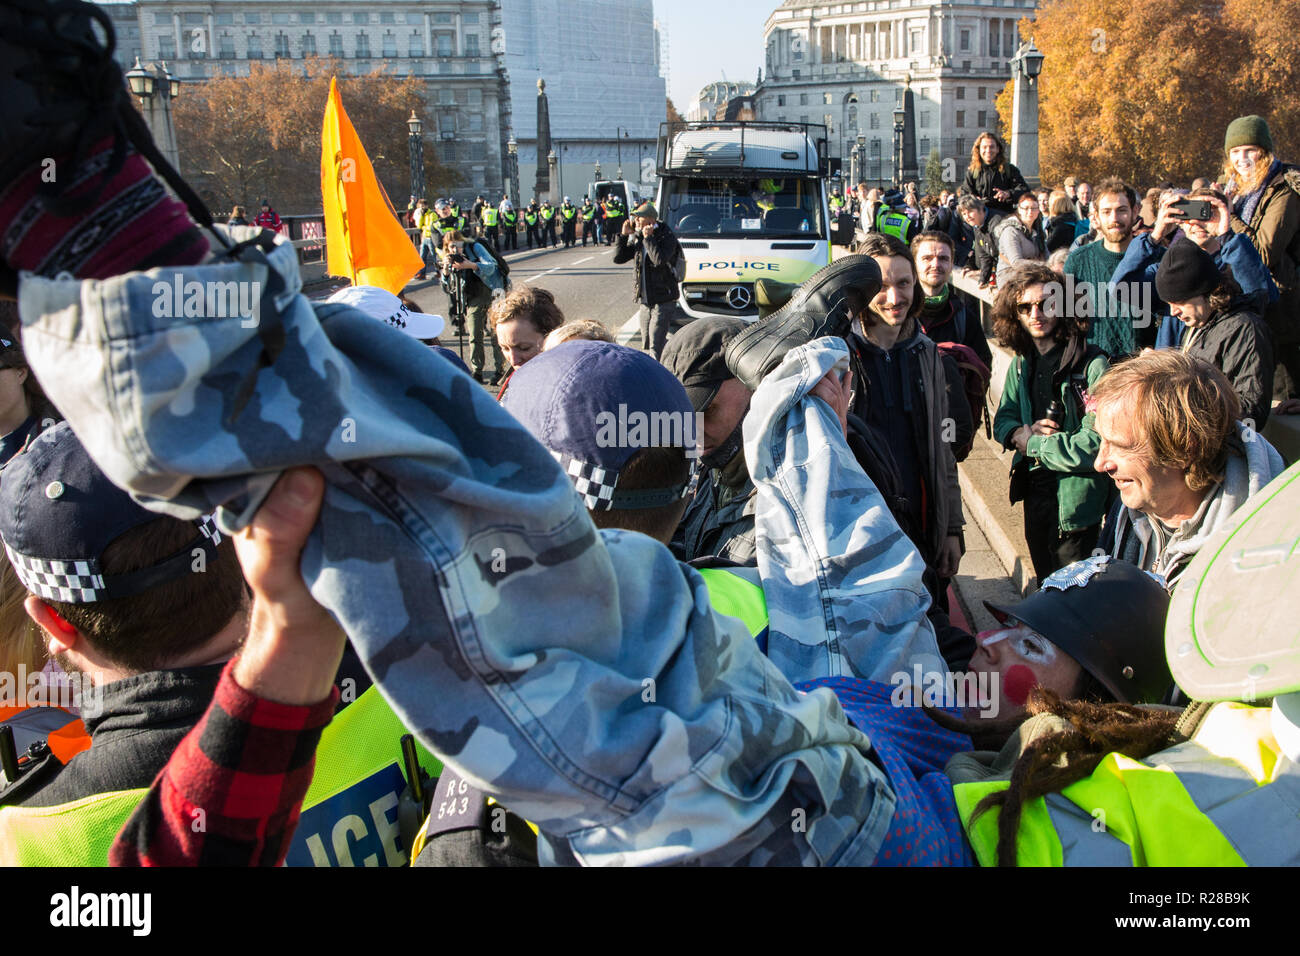 London, UK. 17th November, 2018. Police officers arrest a man after environmental campaigners from Extinction Rebellion blocked Lambeth Bridge, one of five bridges blocked in central London, as part of a Rebellion Day event to highlight 'criminal inaction in the face of climate change catastrophe and ecological collapse' by the UK Government as part of a programme of civil disobedience during which scores of campaigners have been arrested. Clowns from Clandestine Insurgent Rebel Clown Army (CIRCA follow them. Credit: Mark Kerrison/Alamy Live News Stock Photo